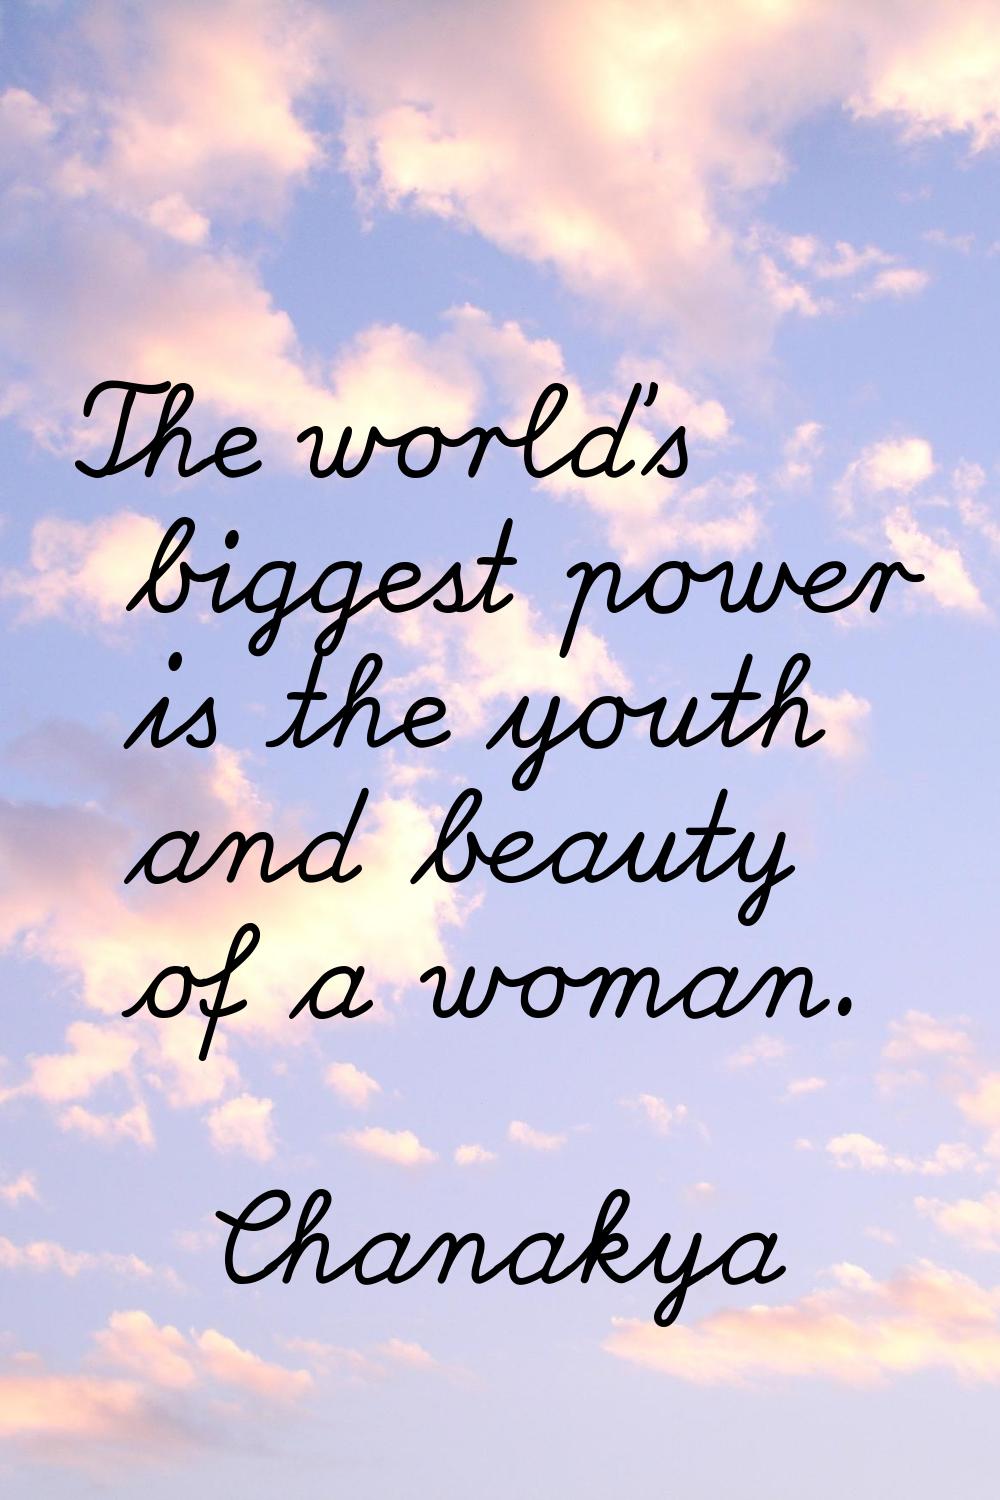 The world's biggest power is the youth and beauty of a woman.